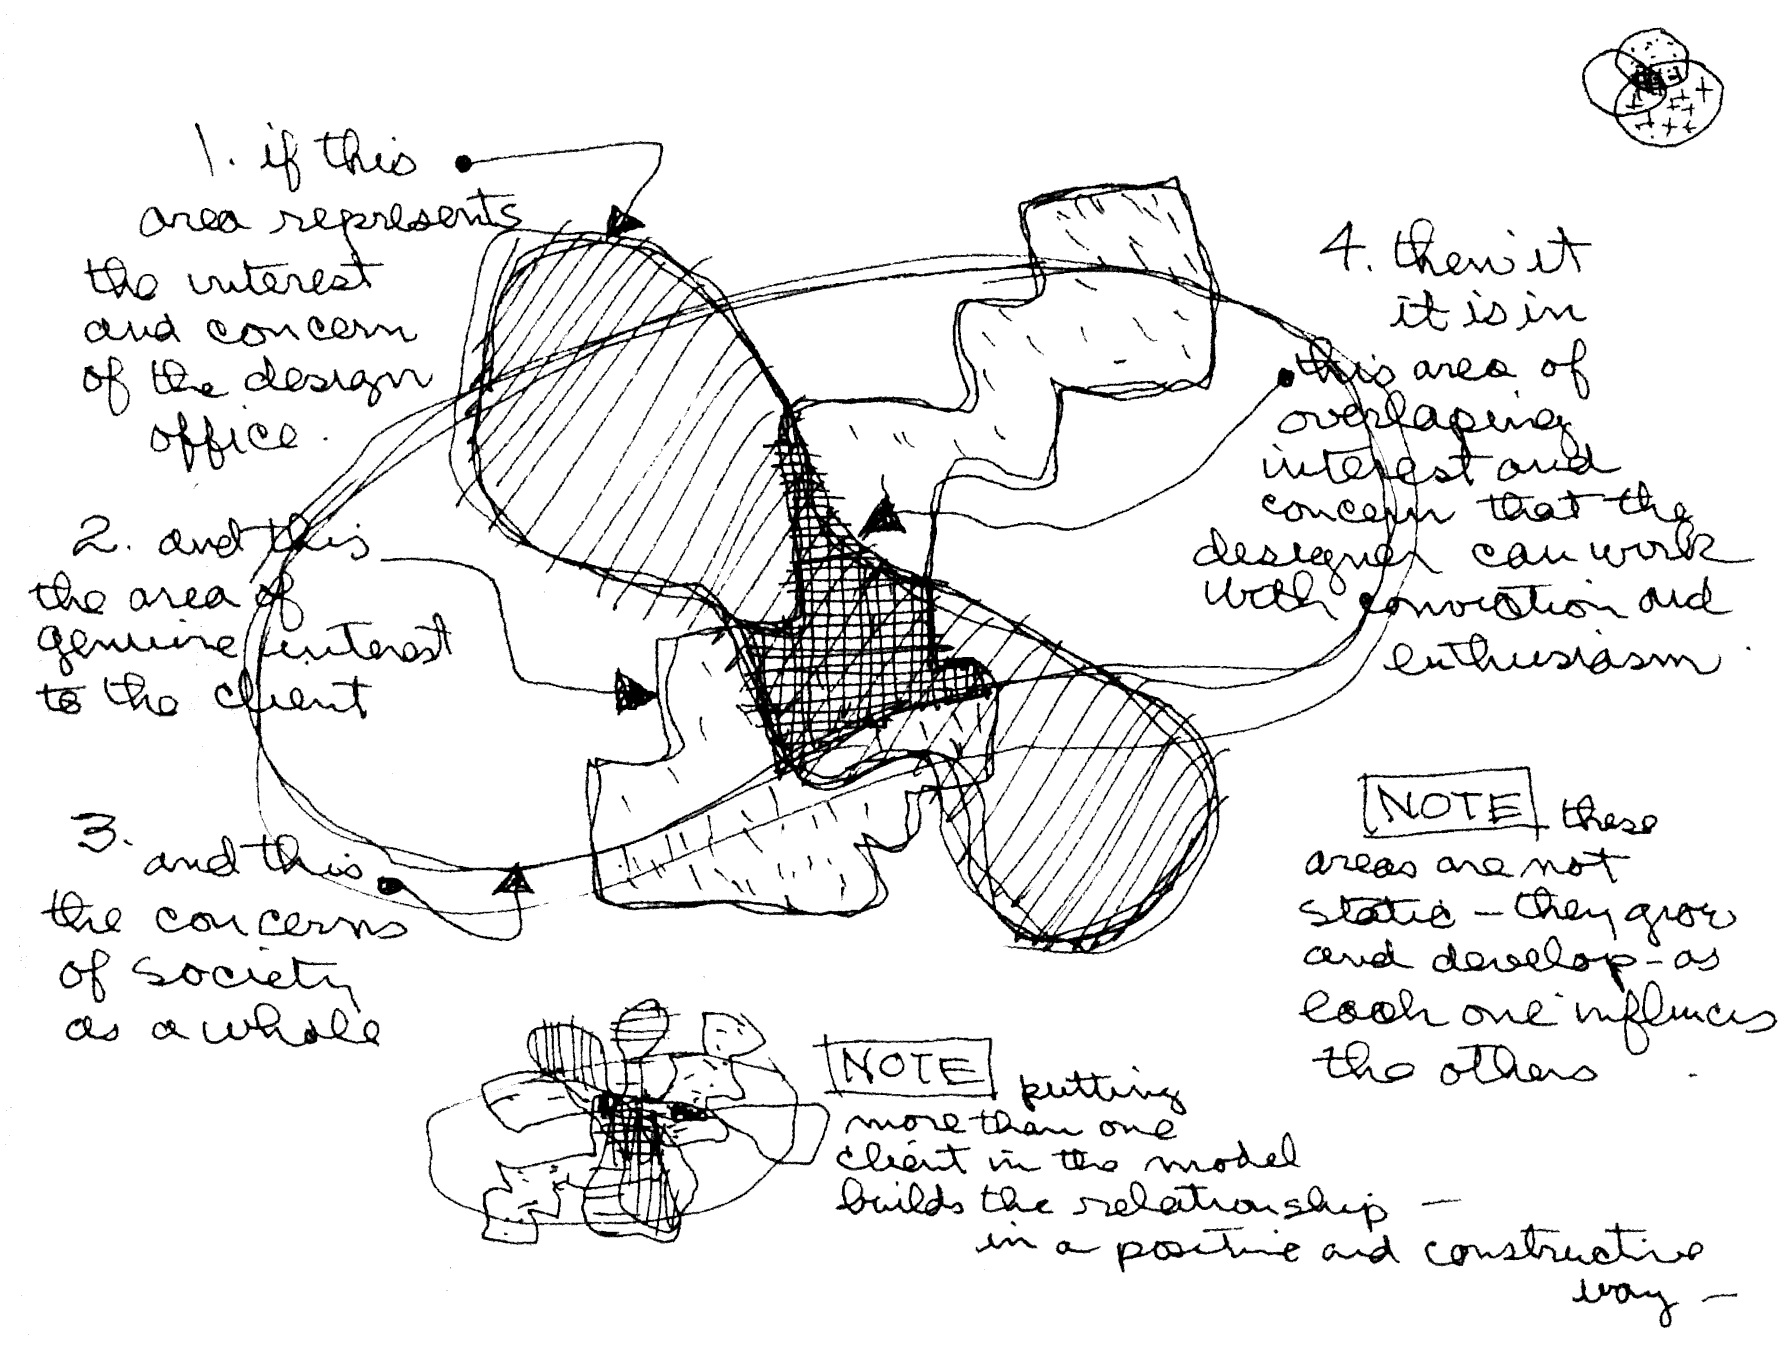 Charles Eames’ conceptual diagram of the design process, displayed at the 1969 exhibition “What Is Design” at the Musée des Arts décoratifs in Paris.